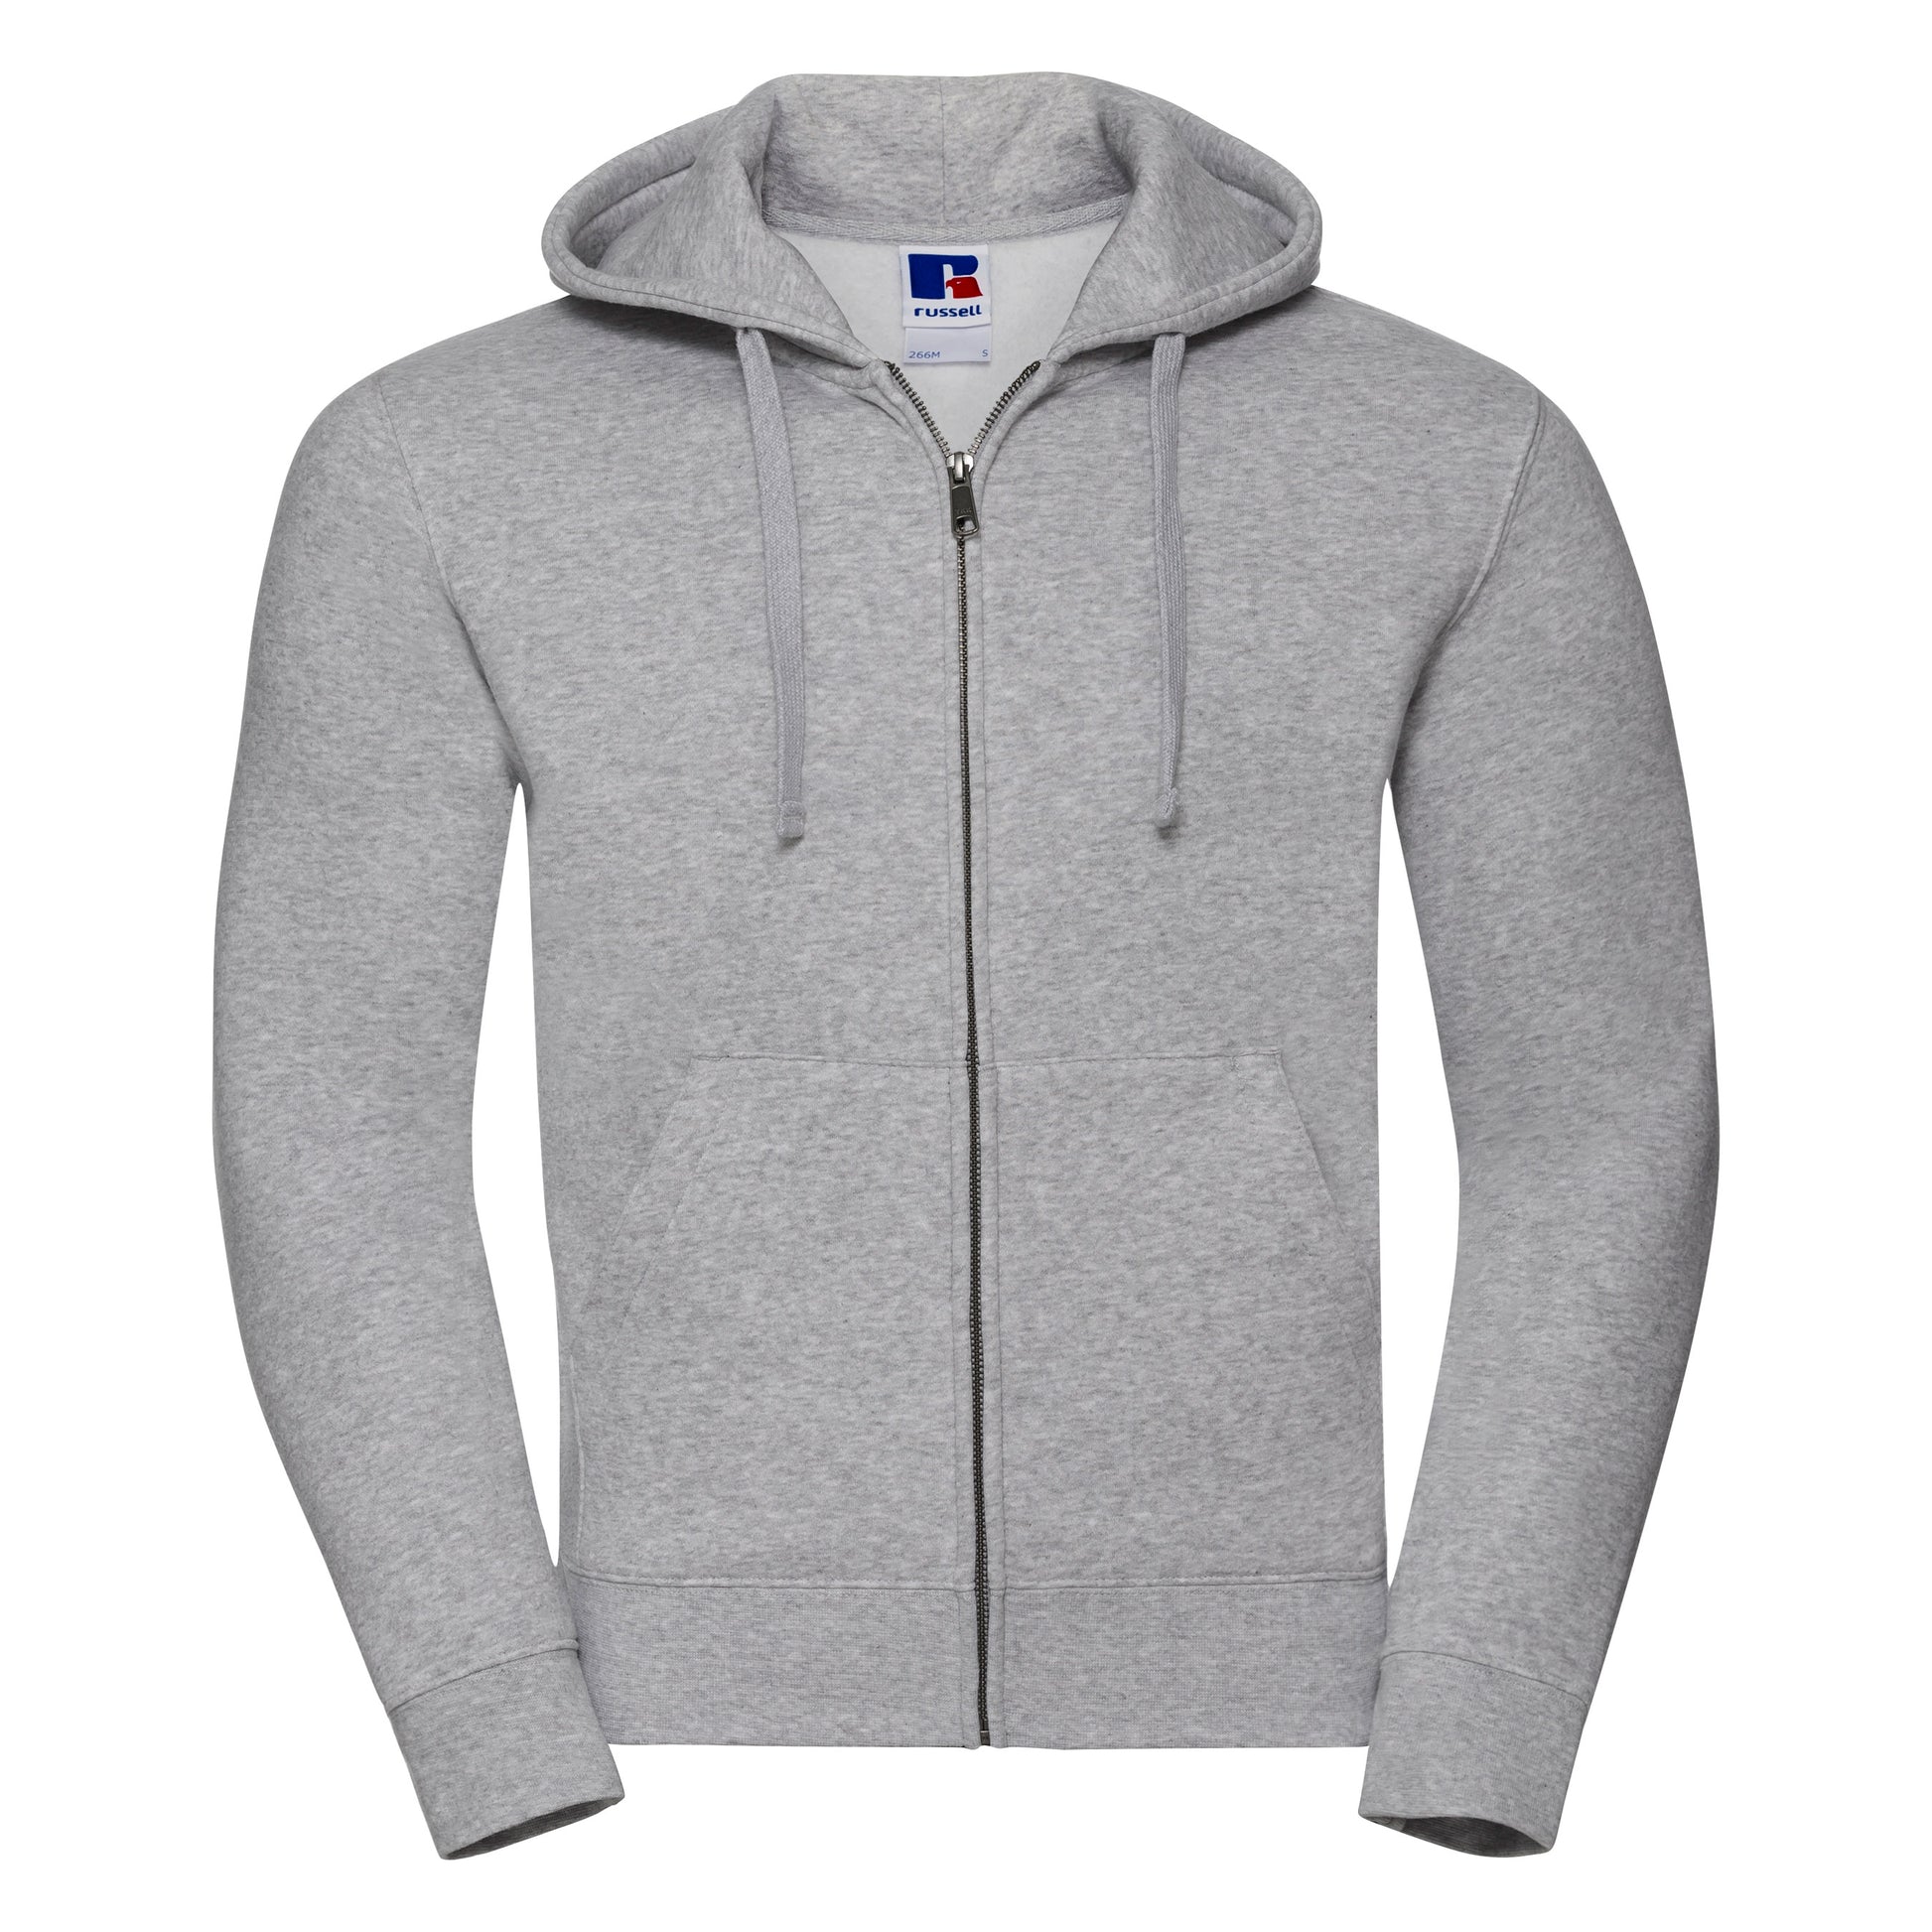 Authentic Zipped Hoodie